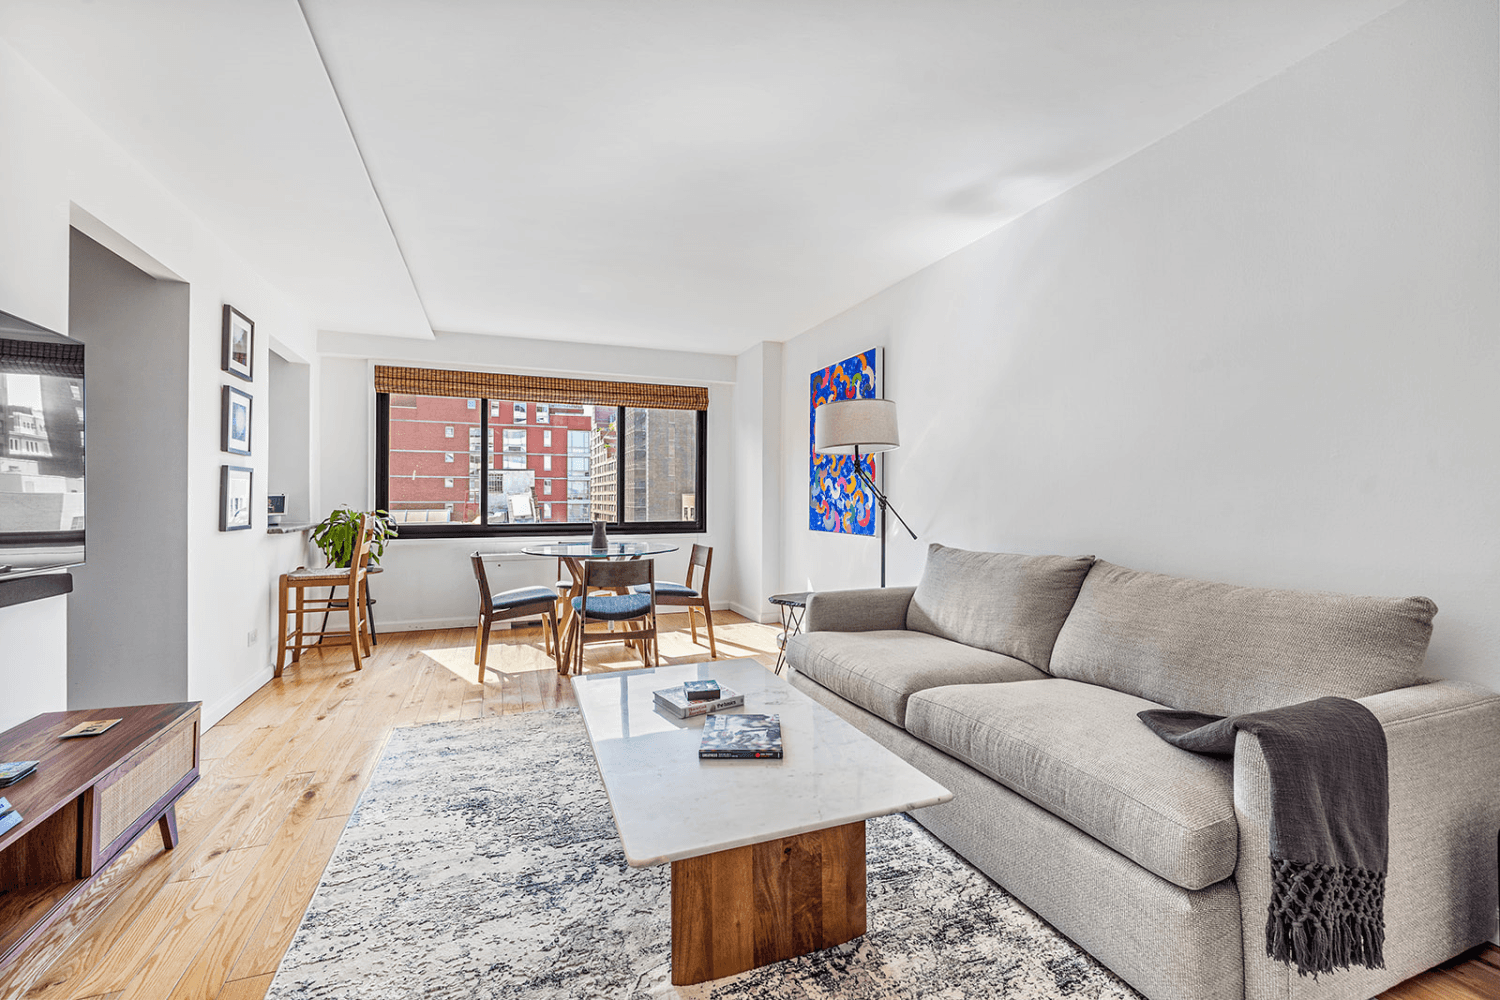 Step into the heart of Chelsea and discover an exquisite one bedroom coop apartment that seamlessly combines the charm of two studios, offering abundant space and versatility.